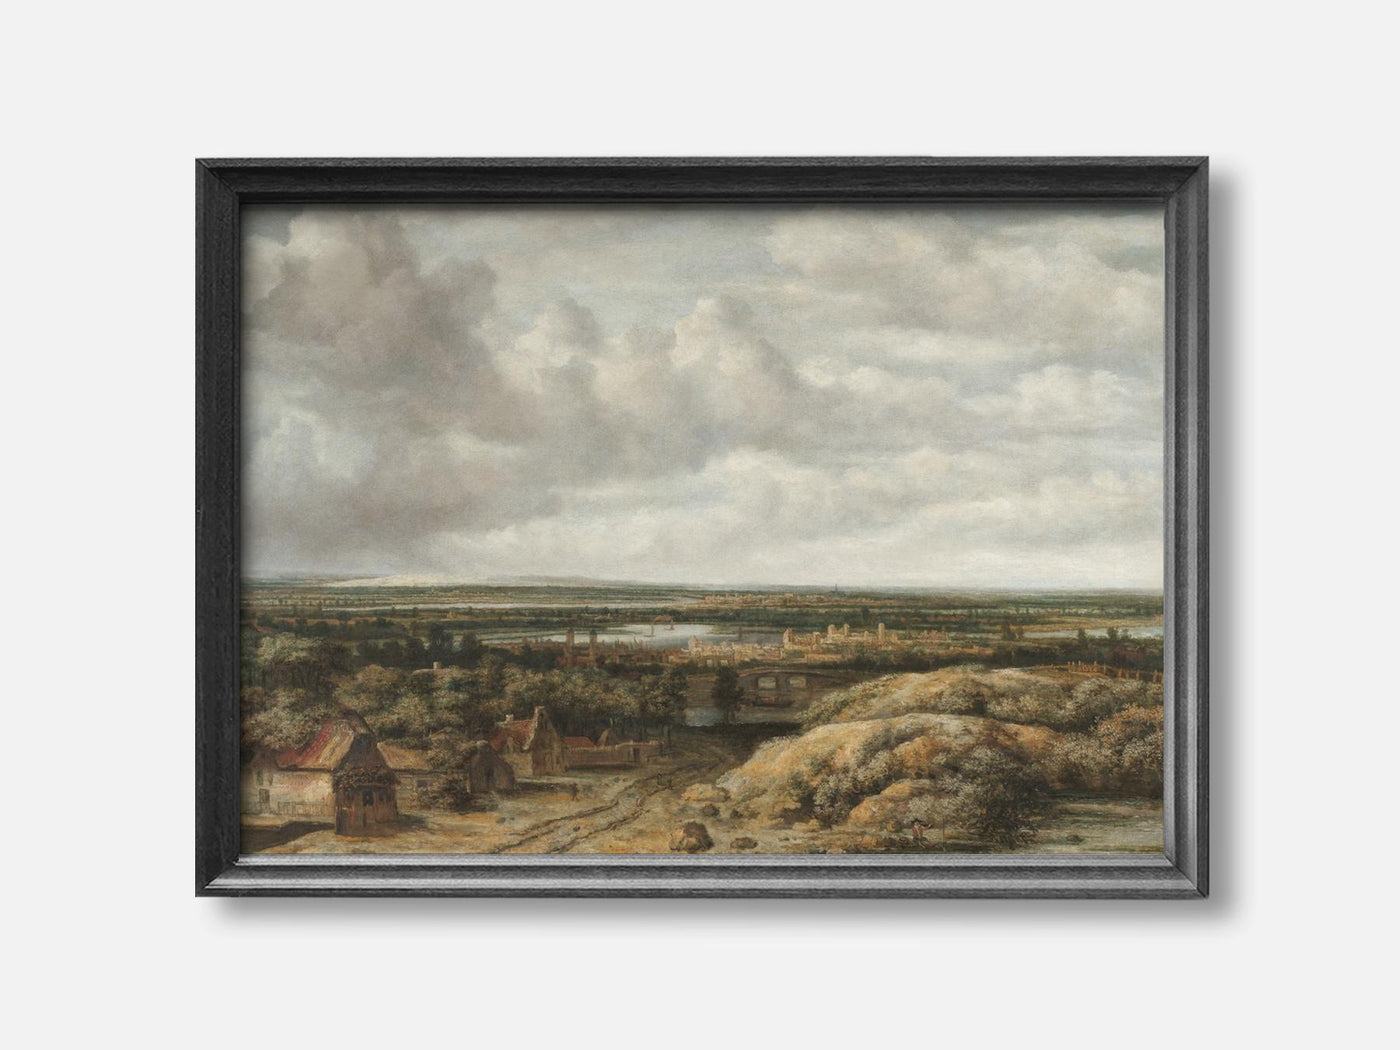 Distant View with Cottages along a Road Art Print mockup - A_p9-V1-PC_F+B-SS_1-PS_5x7-C_def variant